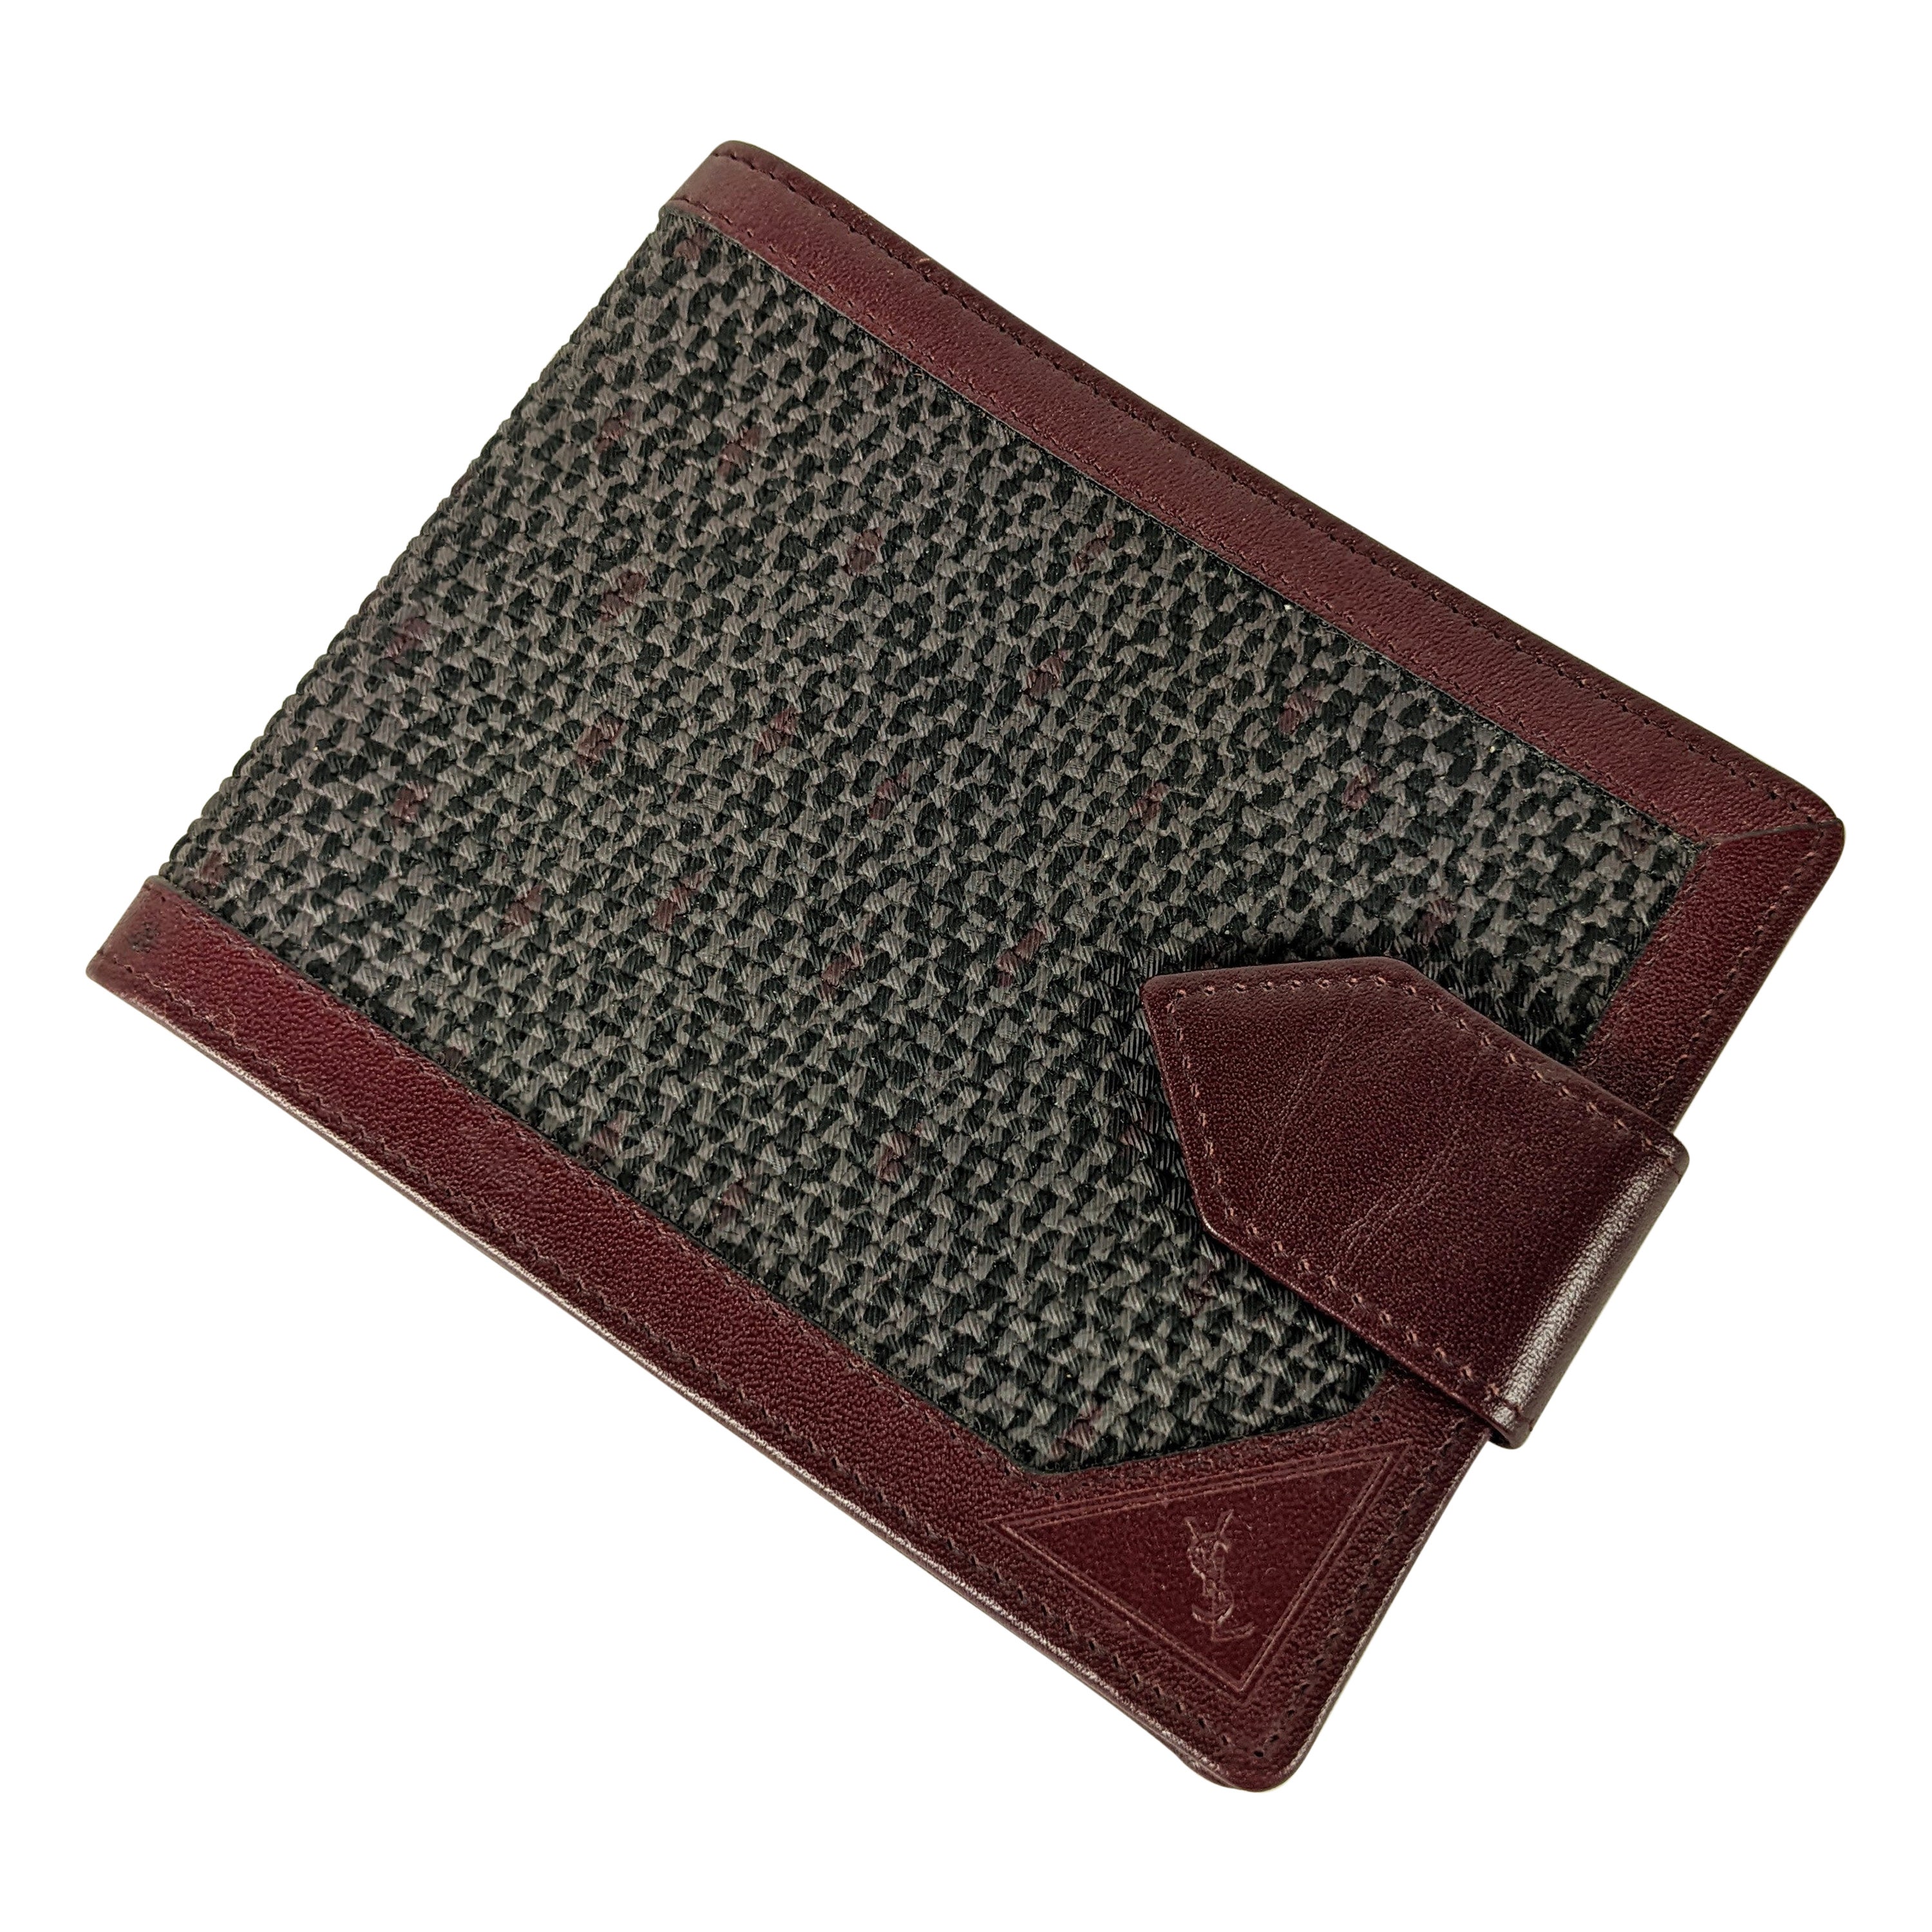 Yves Saint Laurent Faux Tweed Leather Fold For Sale